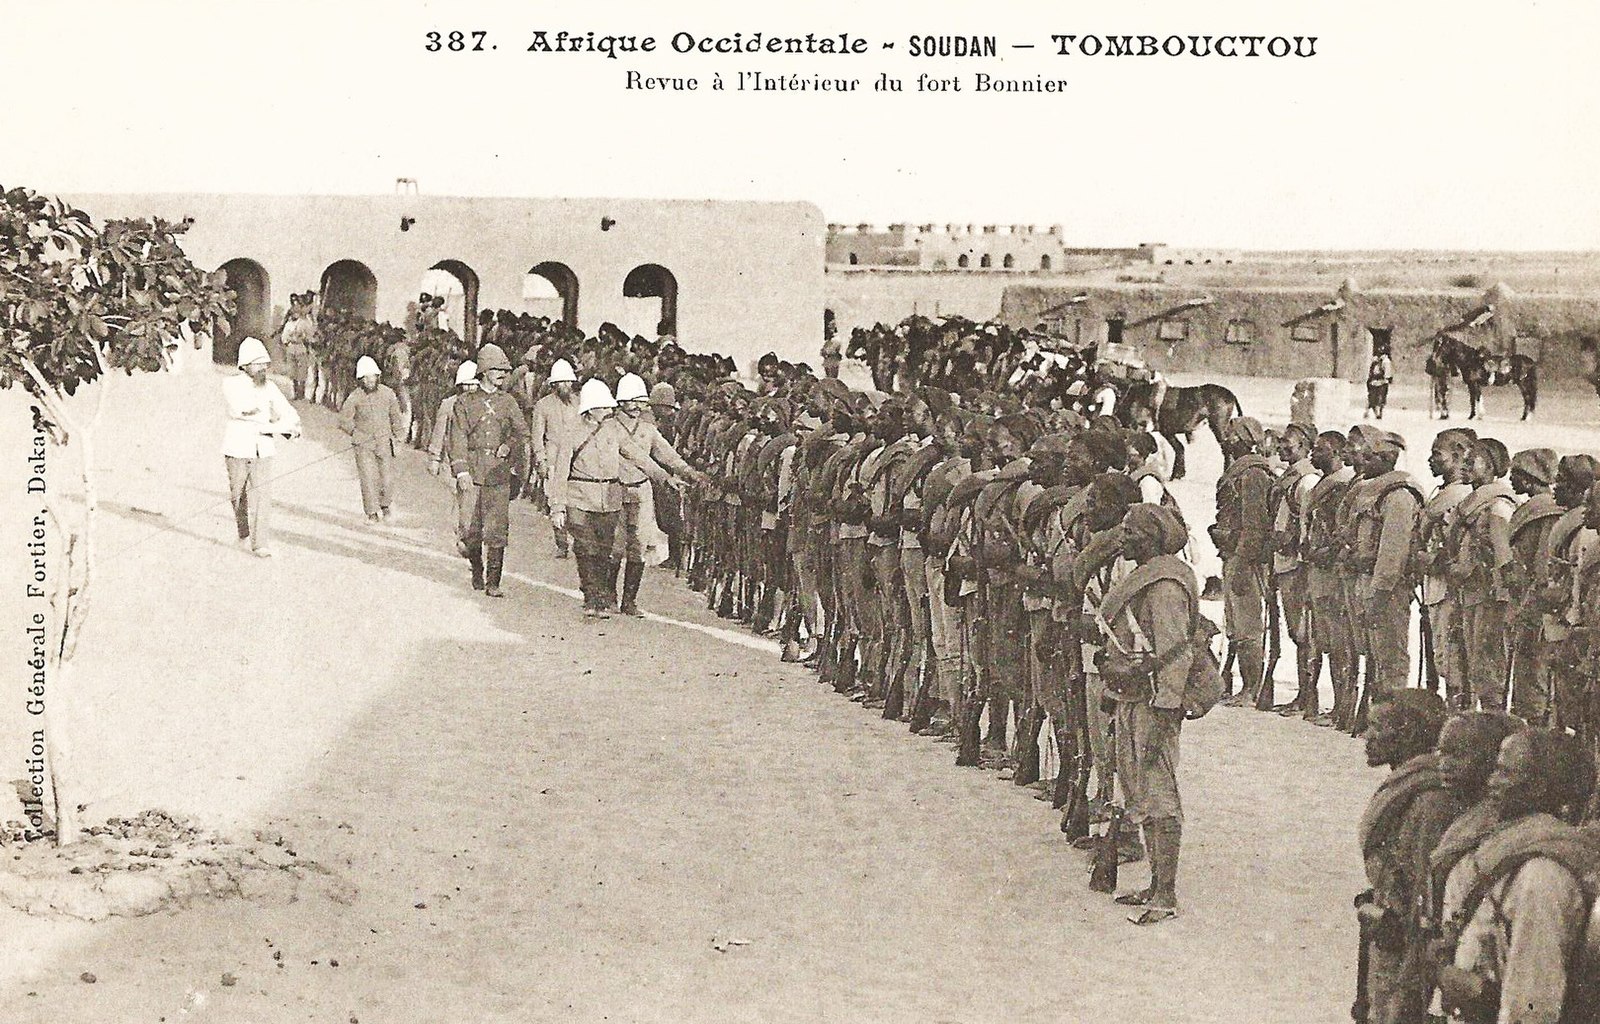 The French colonial army in Fort Bonnier, Tombouctou, today’s Mali